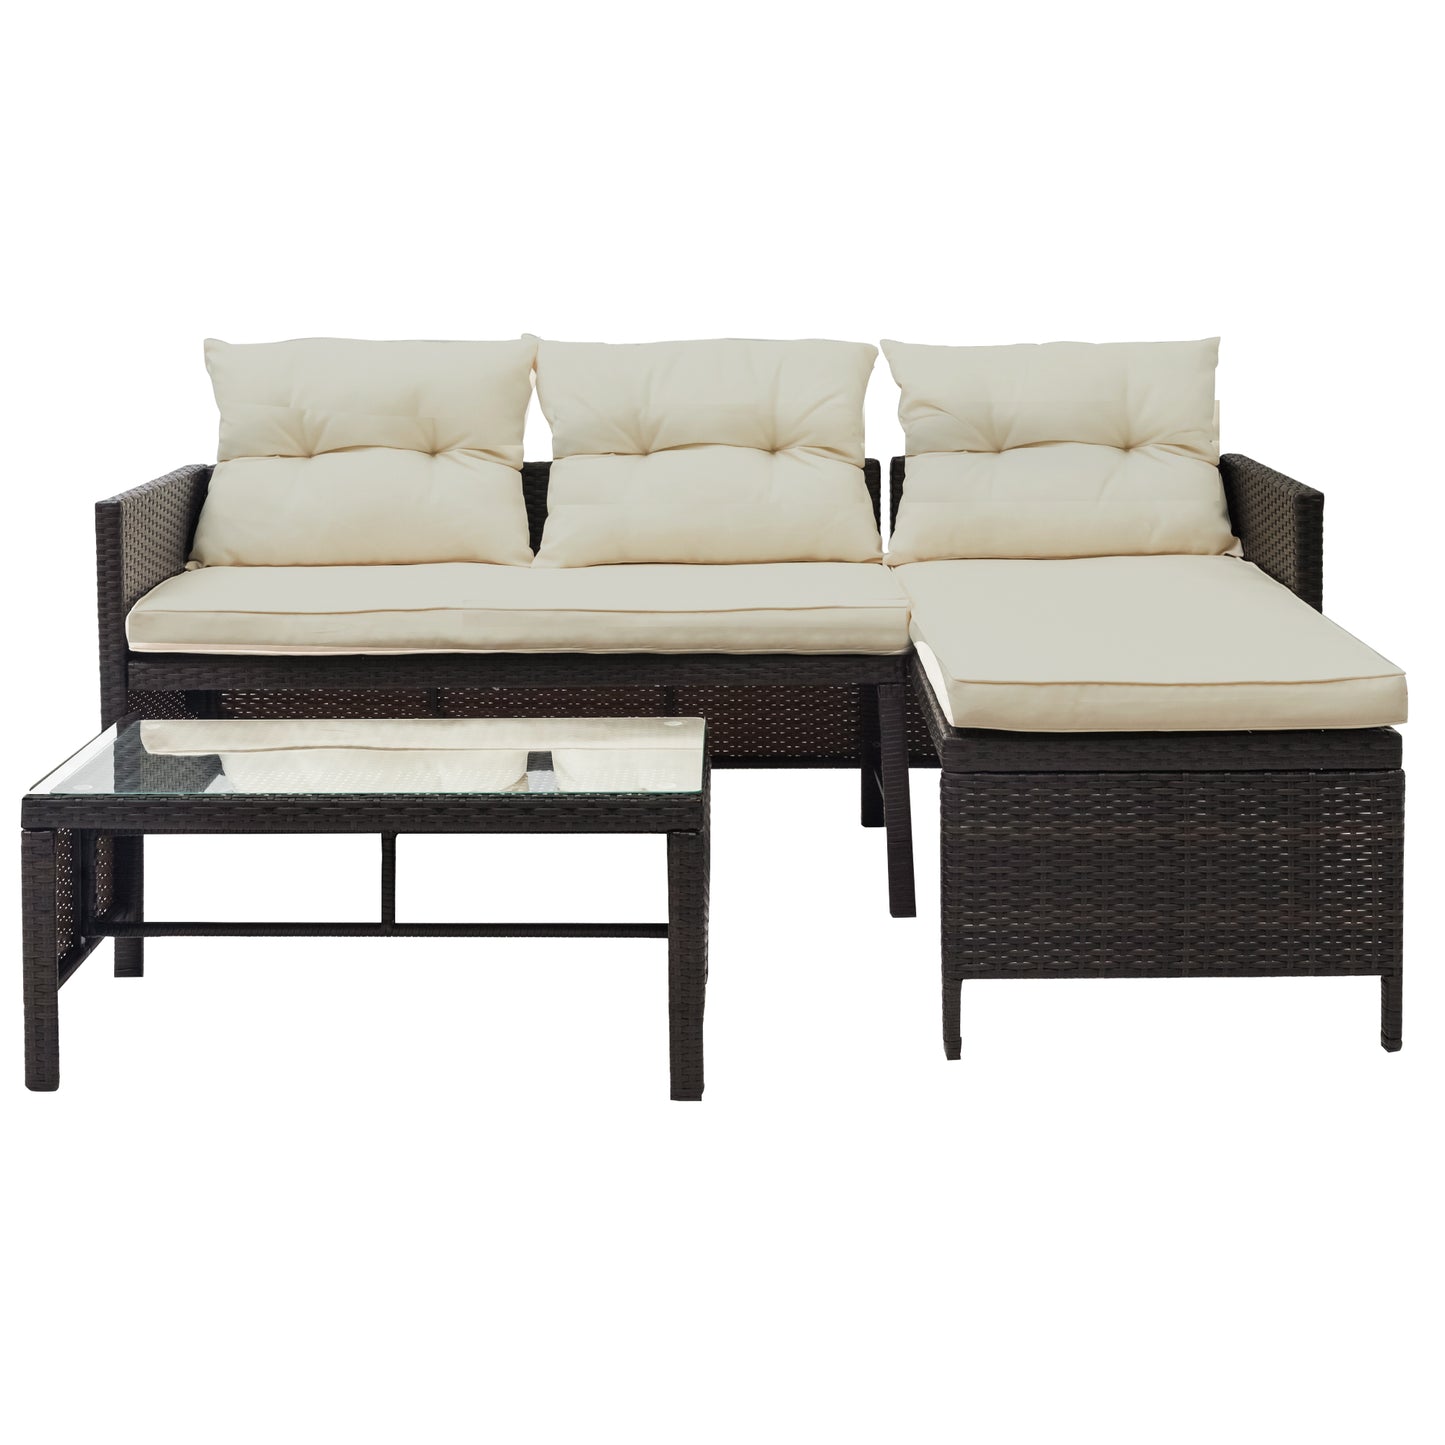 Syngar Patio Furniture Sectional Set, 3-Piece PE Wicker Cushioned Sofa Set, Outdoor Conversation Chair Set with Two-Seater Sofa, Lounge Sofa & Coffee Table, for Backyard, Poolside, Garden, Deck, D6030